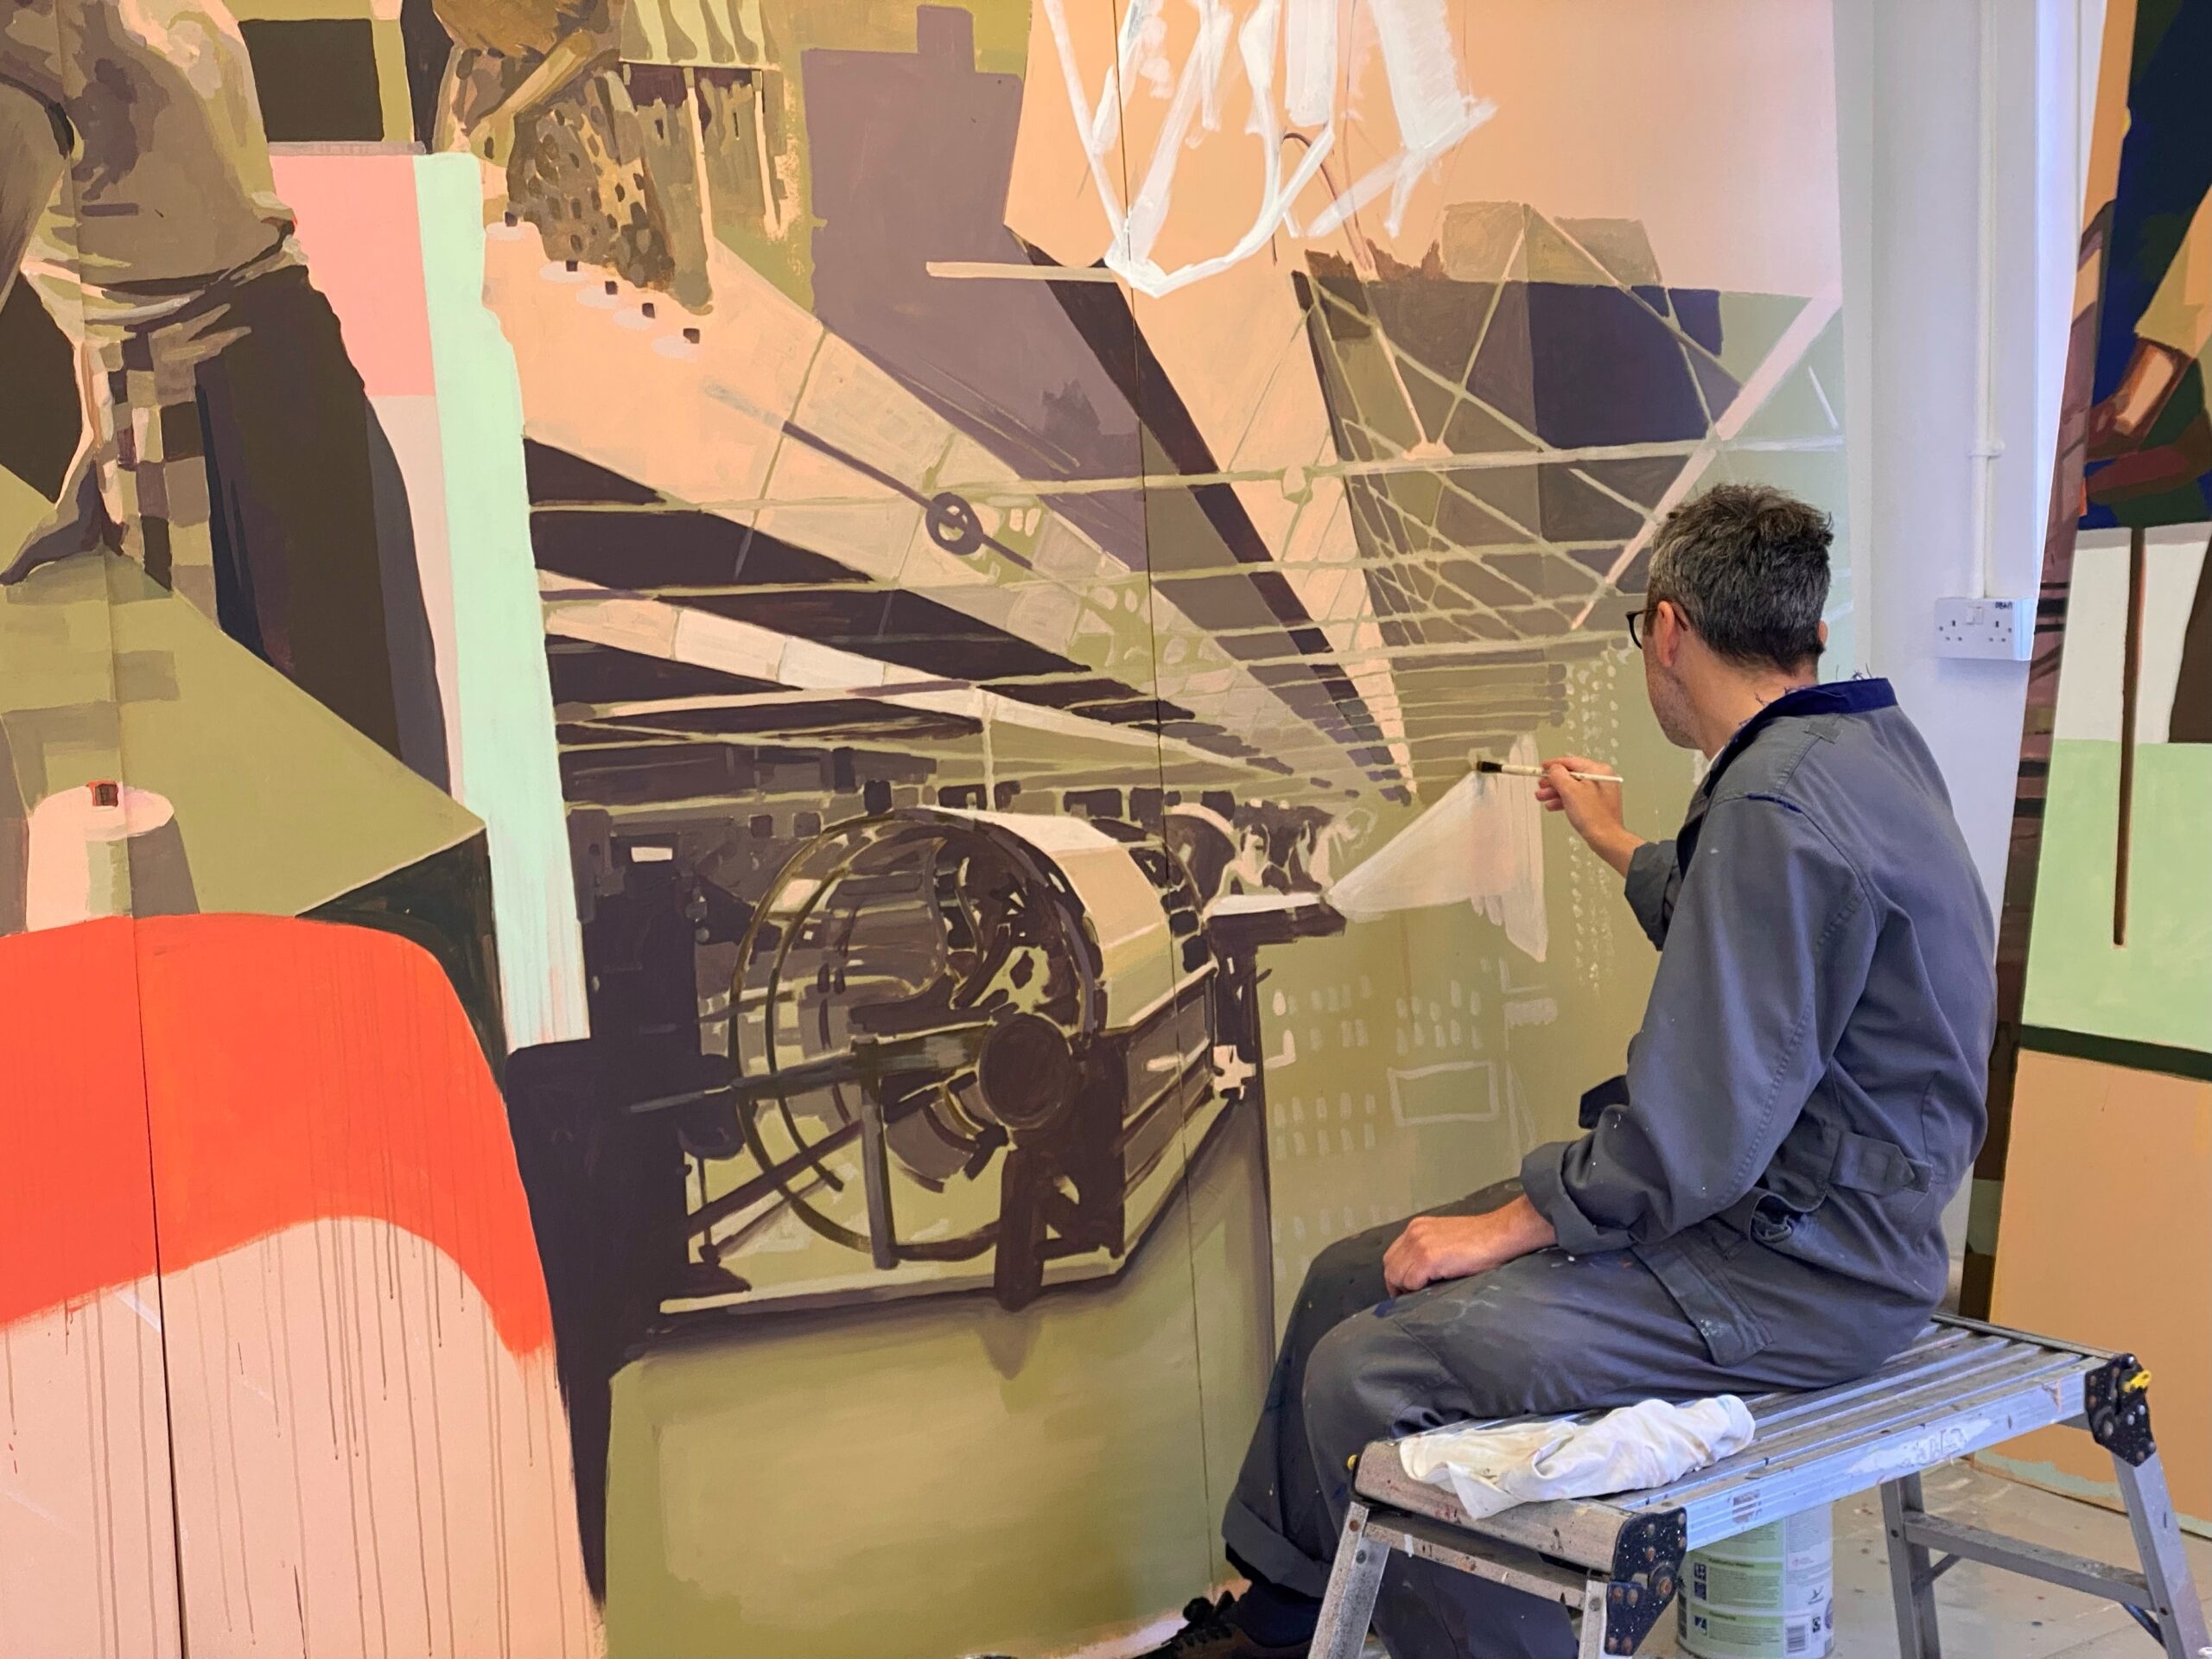 Gavin, dressed in grey overalls, sits on a metal stand as he paints a mural.